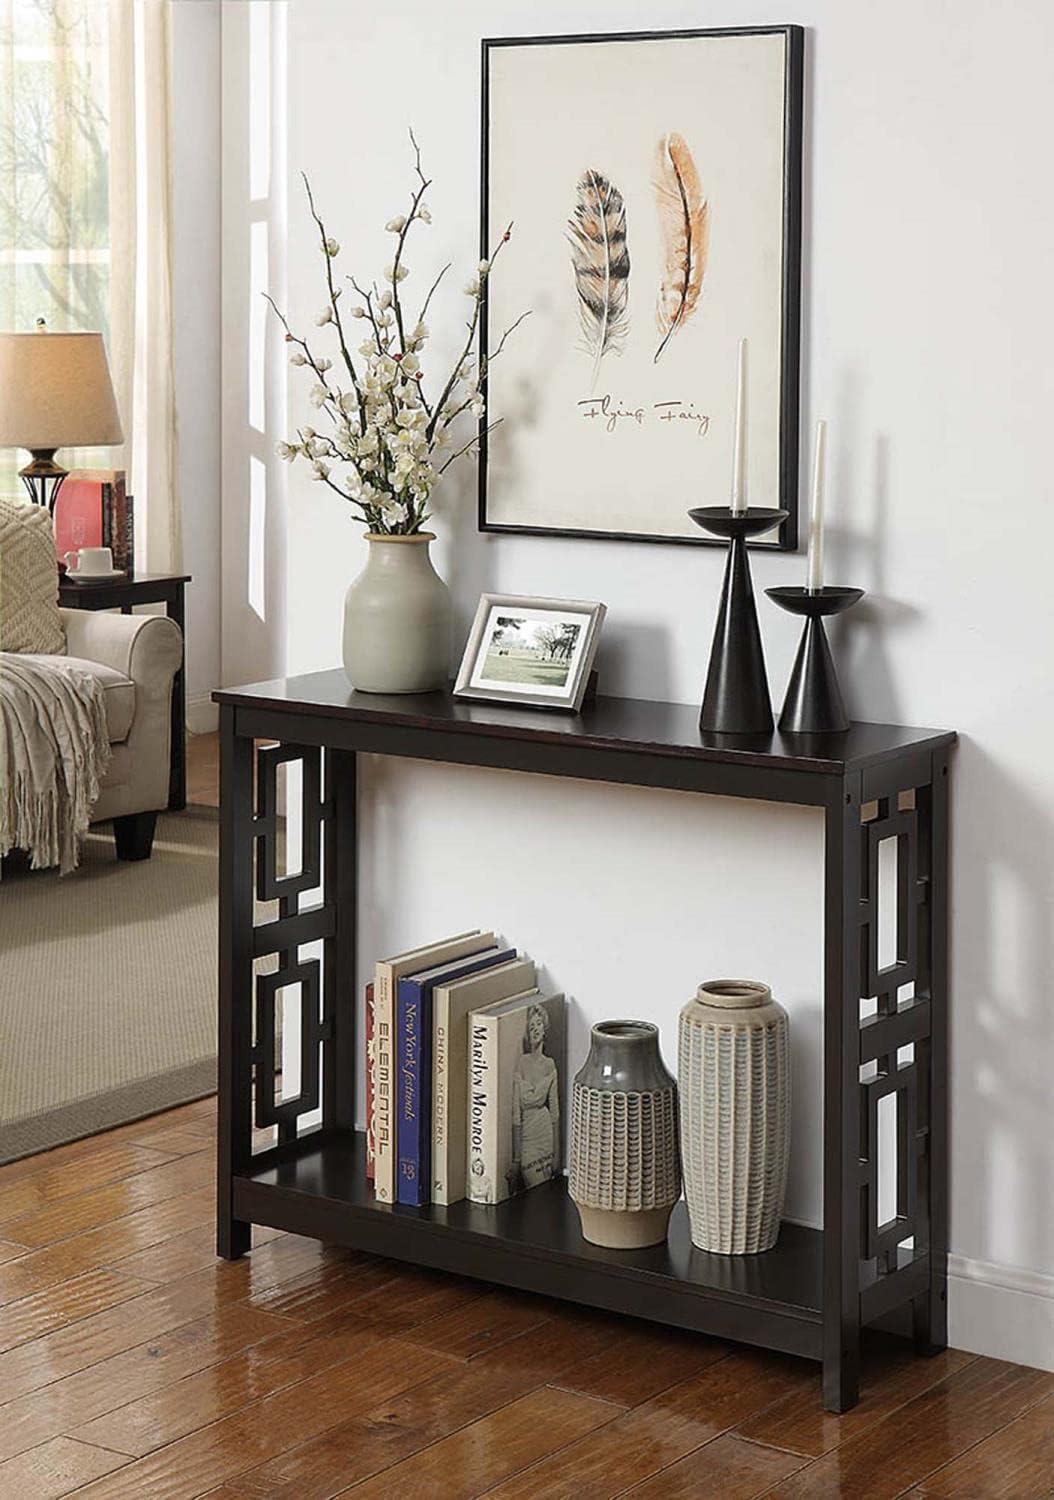 Town Square Espresso 40" Wood Console Table with Storage Shelf